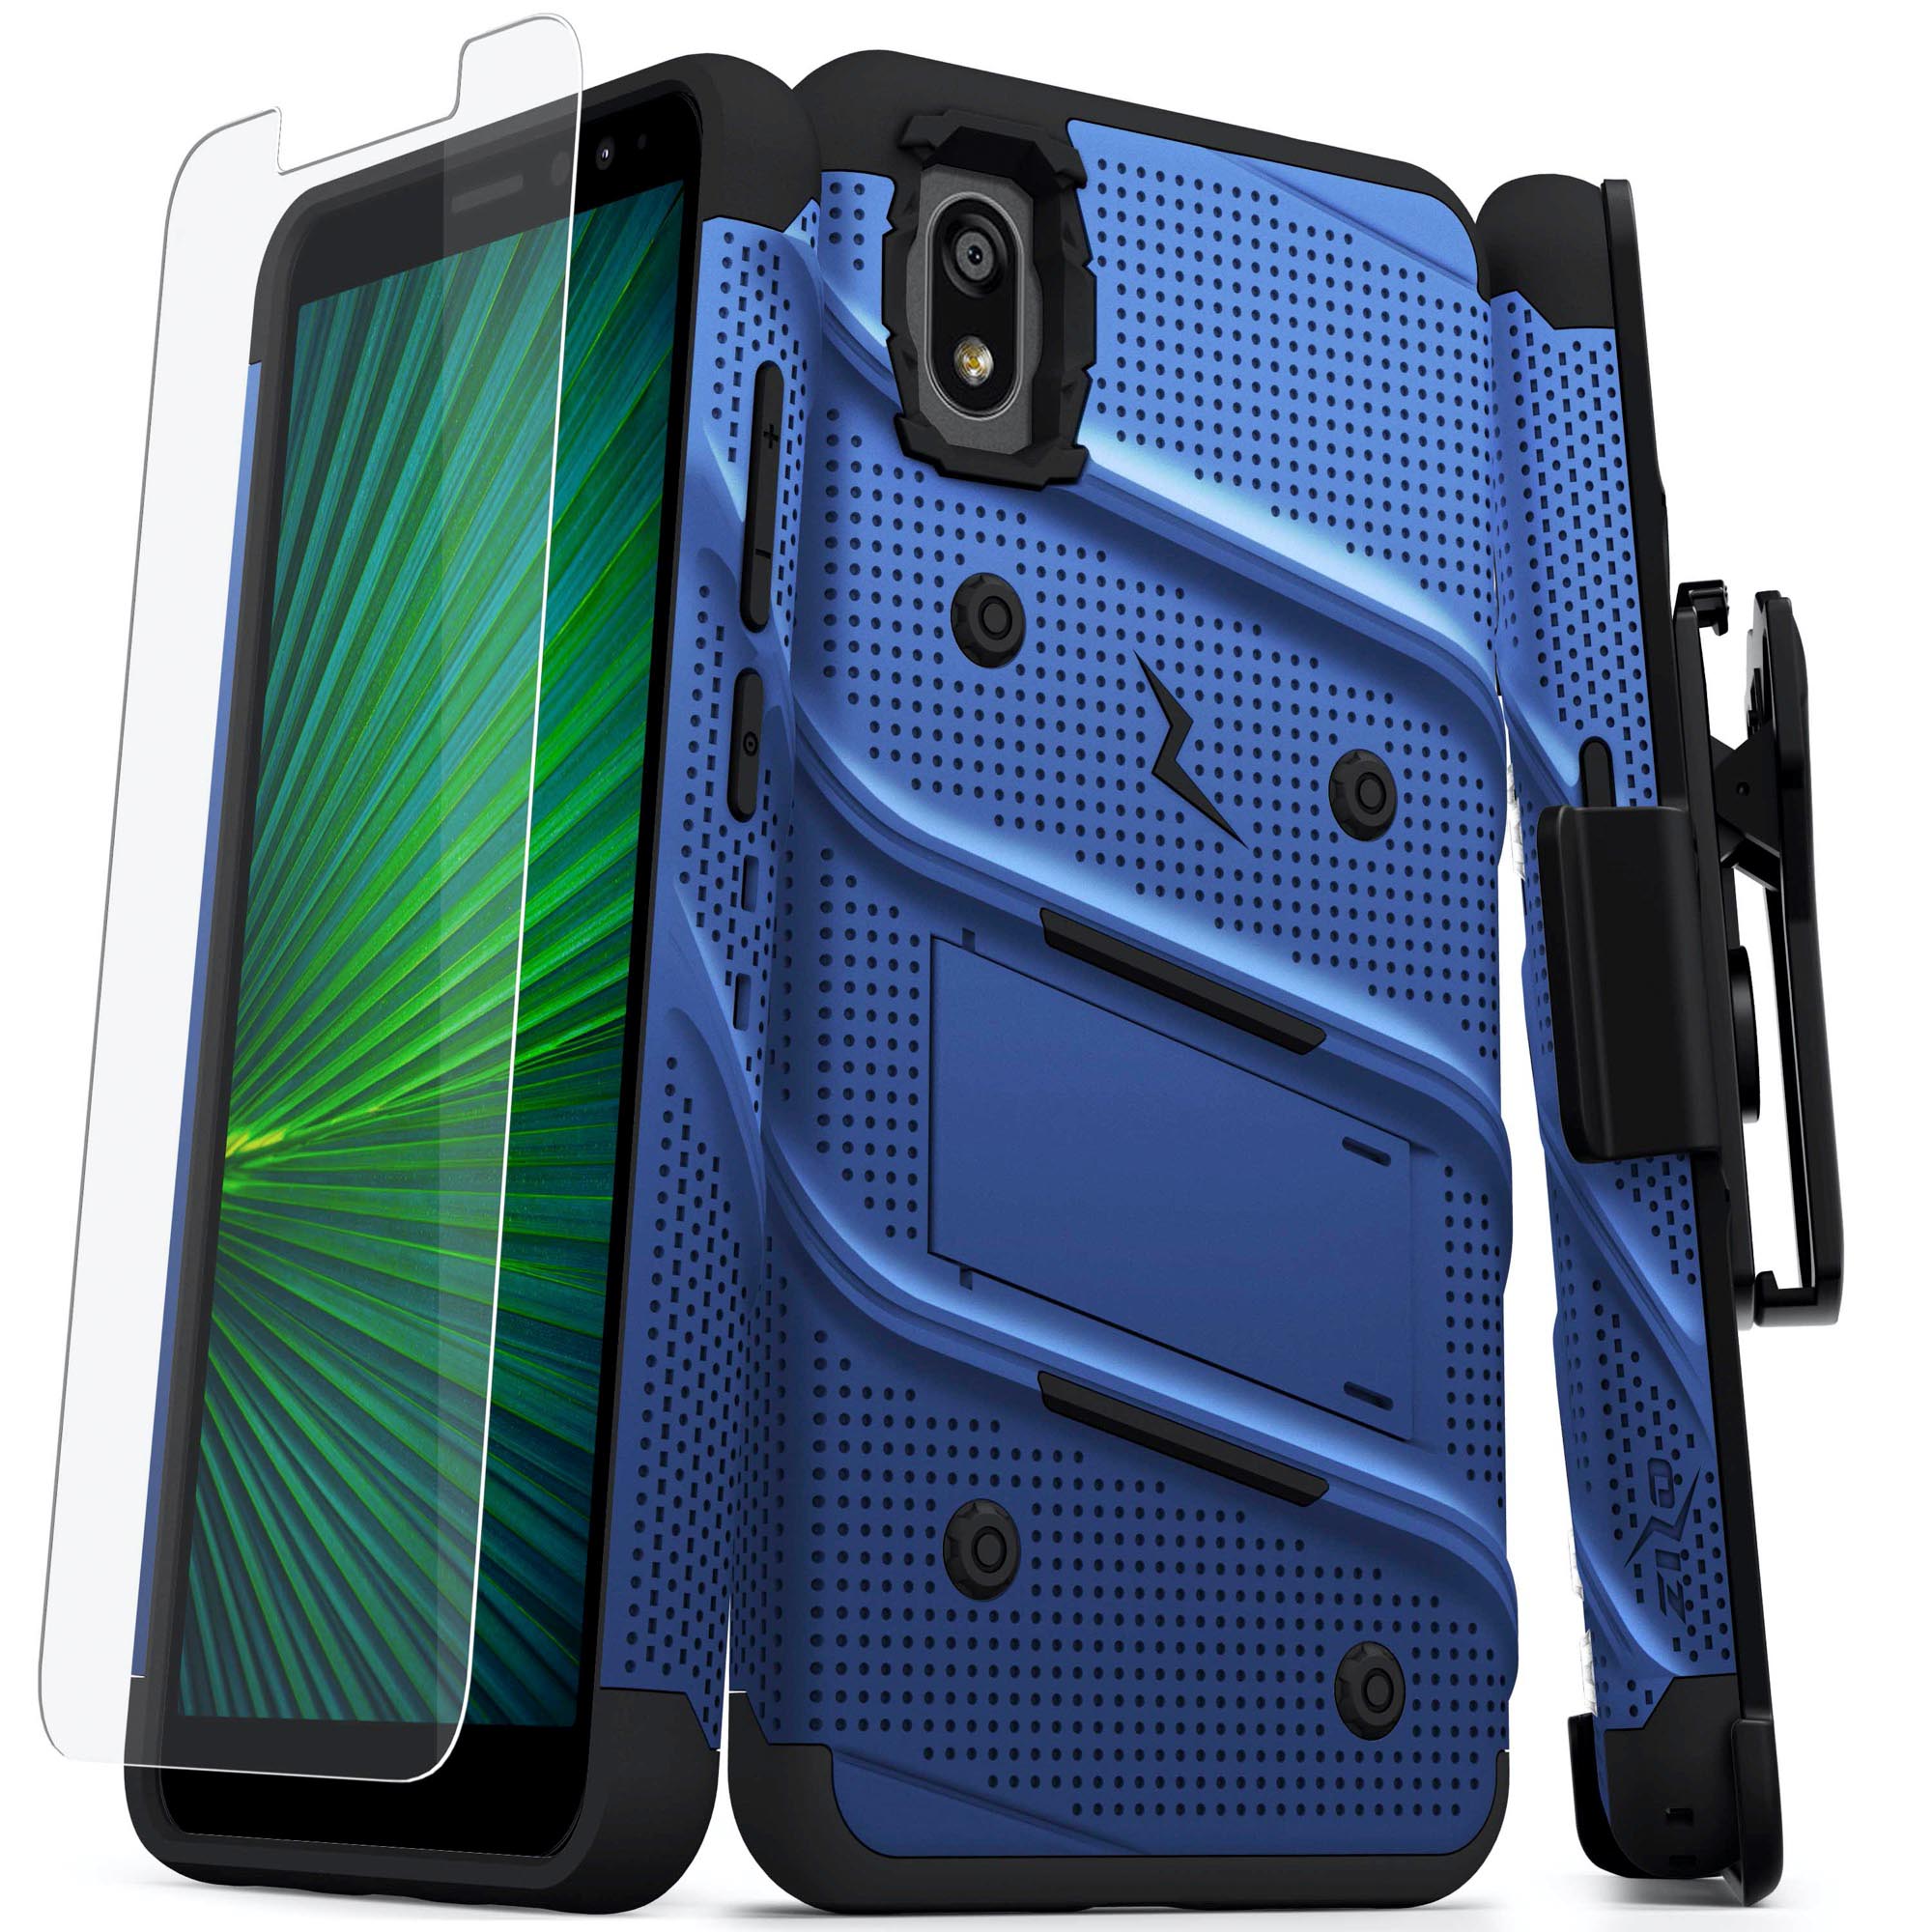 ALCATEL APPRISE ZIZO BOLT SERIES CASE WITH TEMPERED GLASS - BLUE & BLACK (11011)